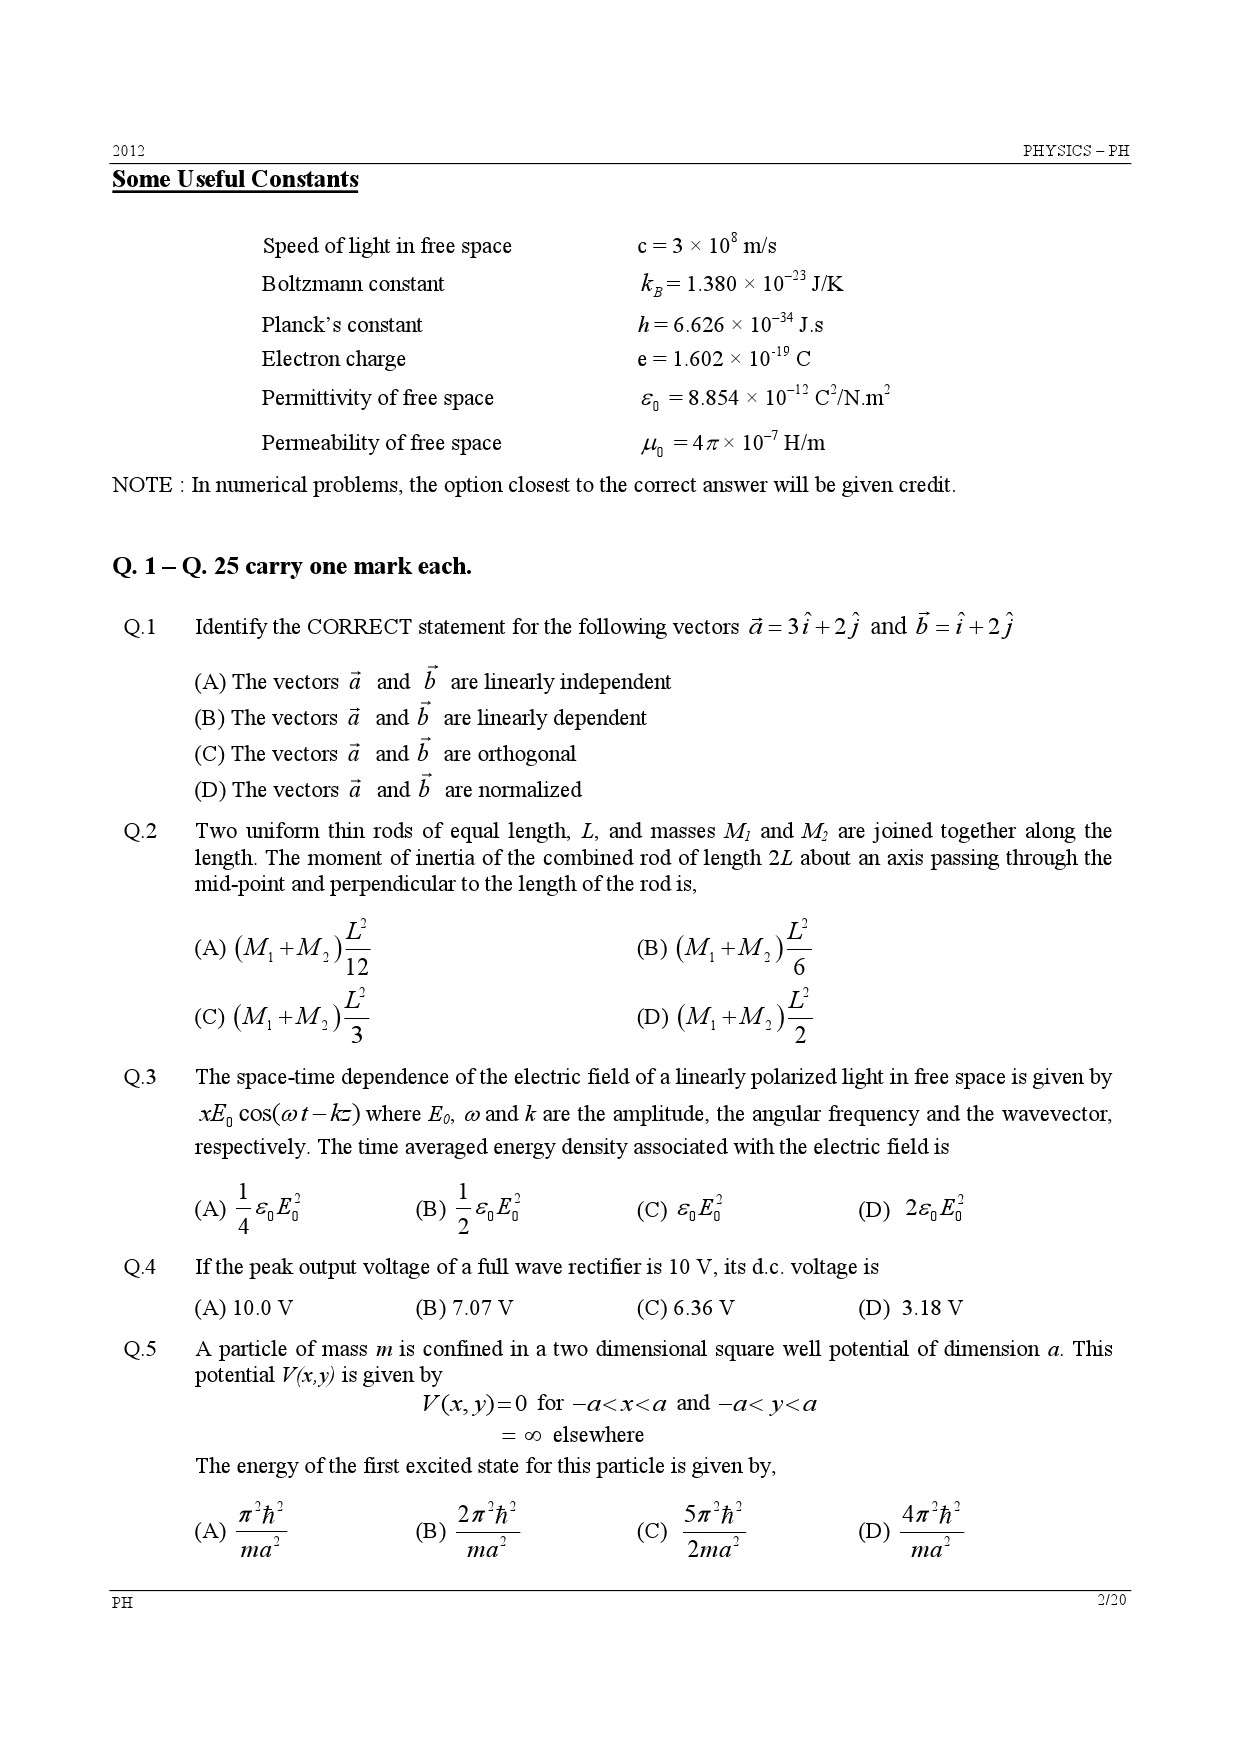 GATE Exam Question Paper 2012 Physics 2